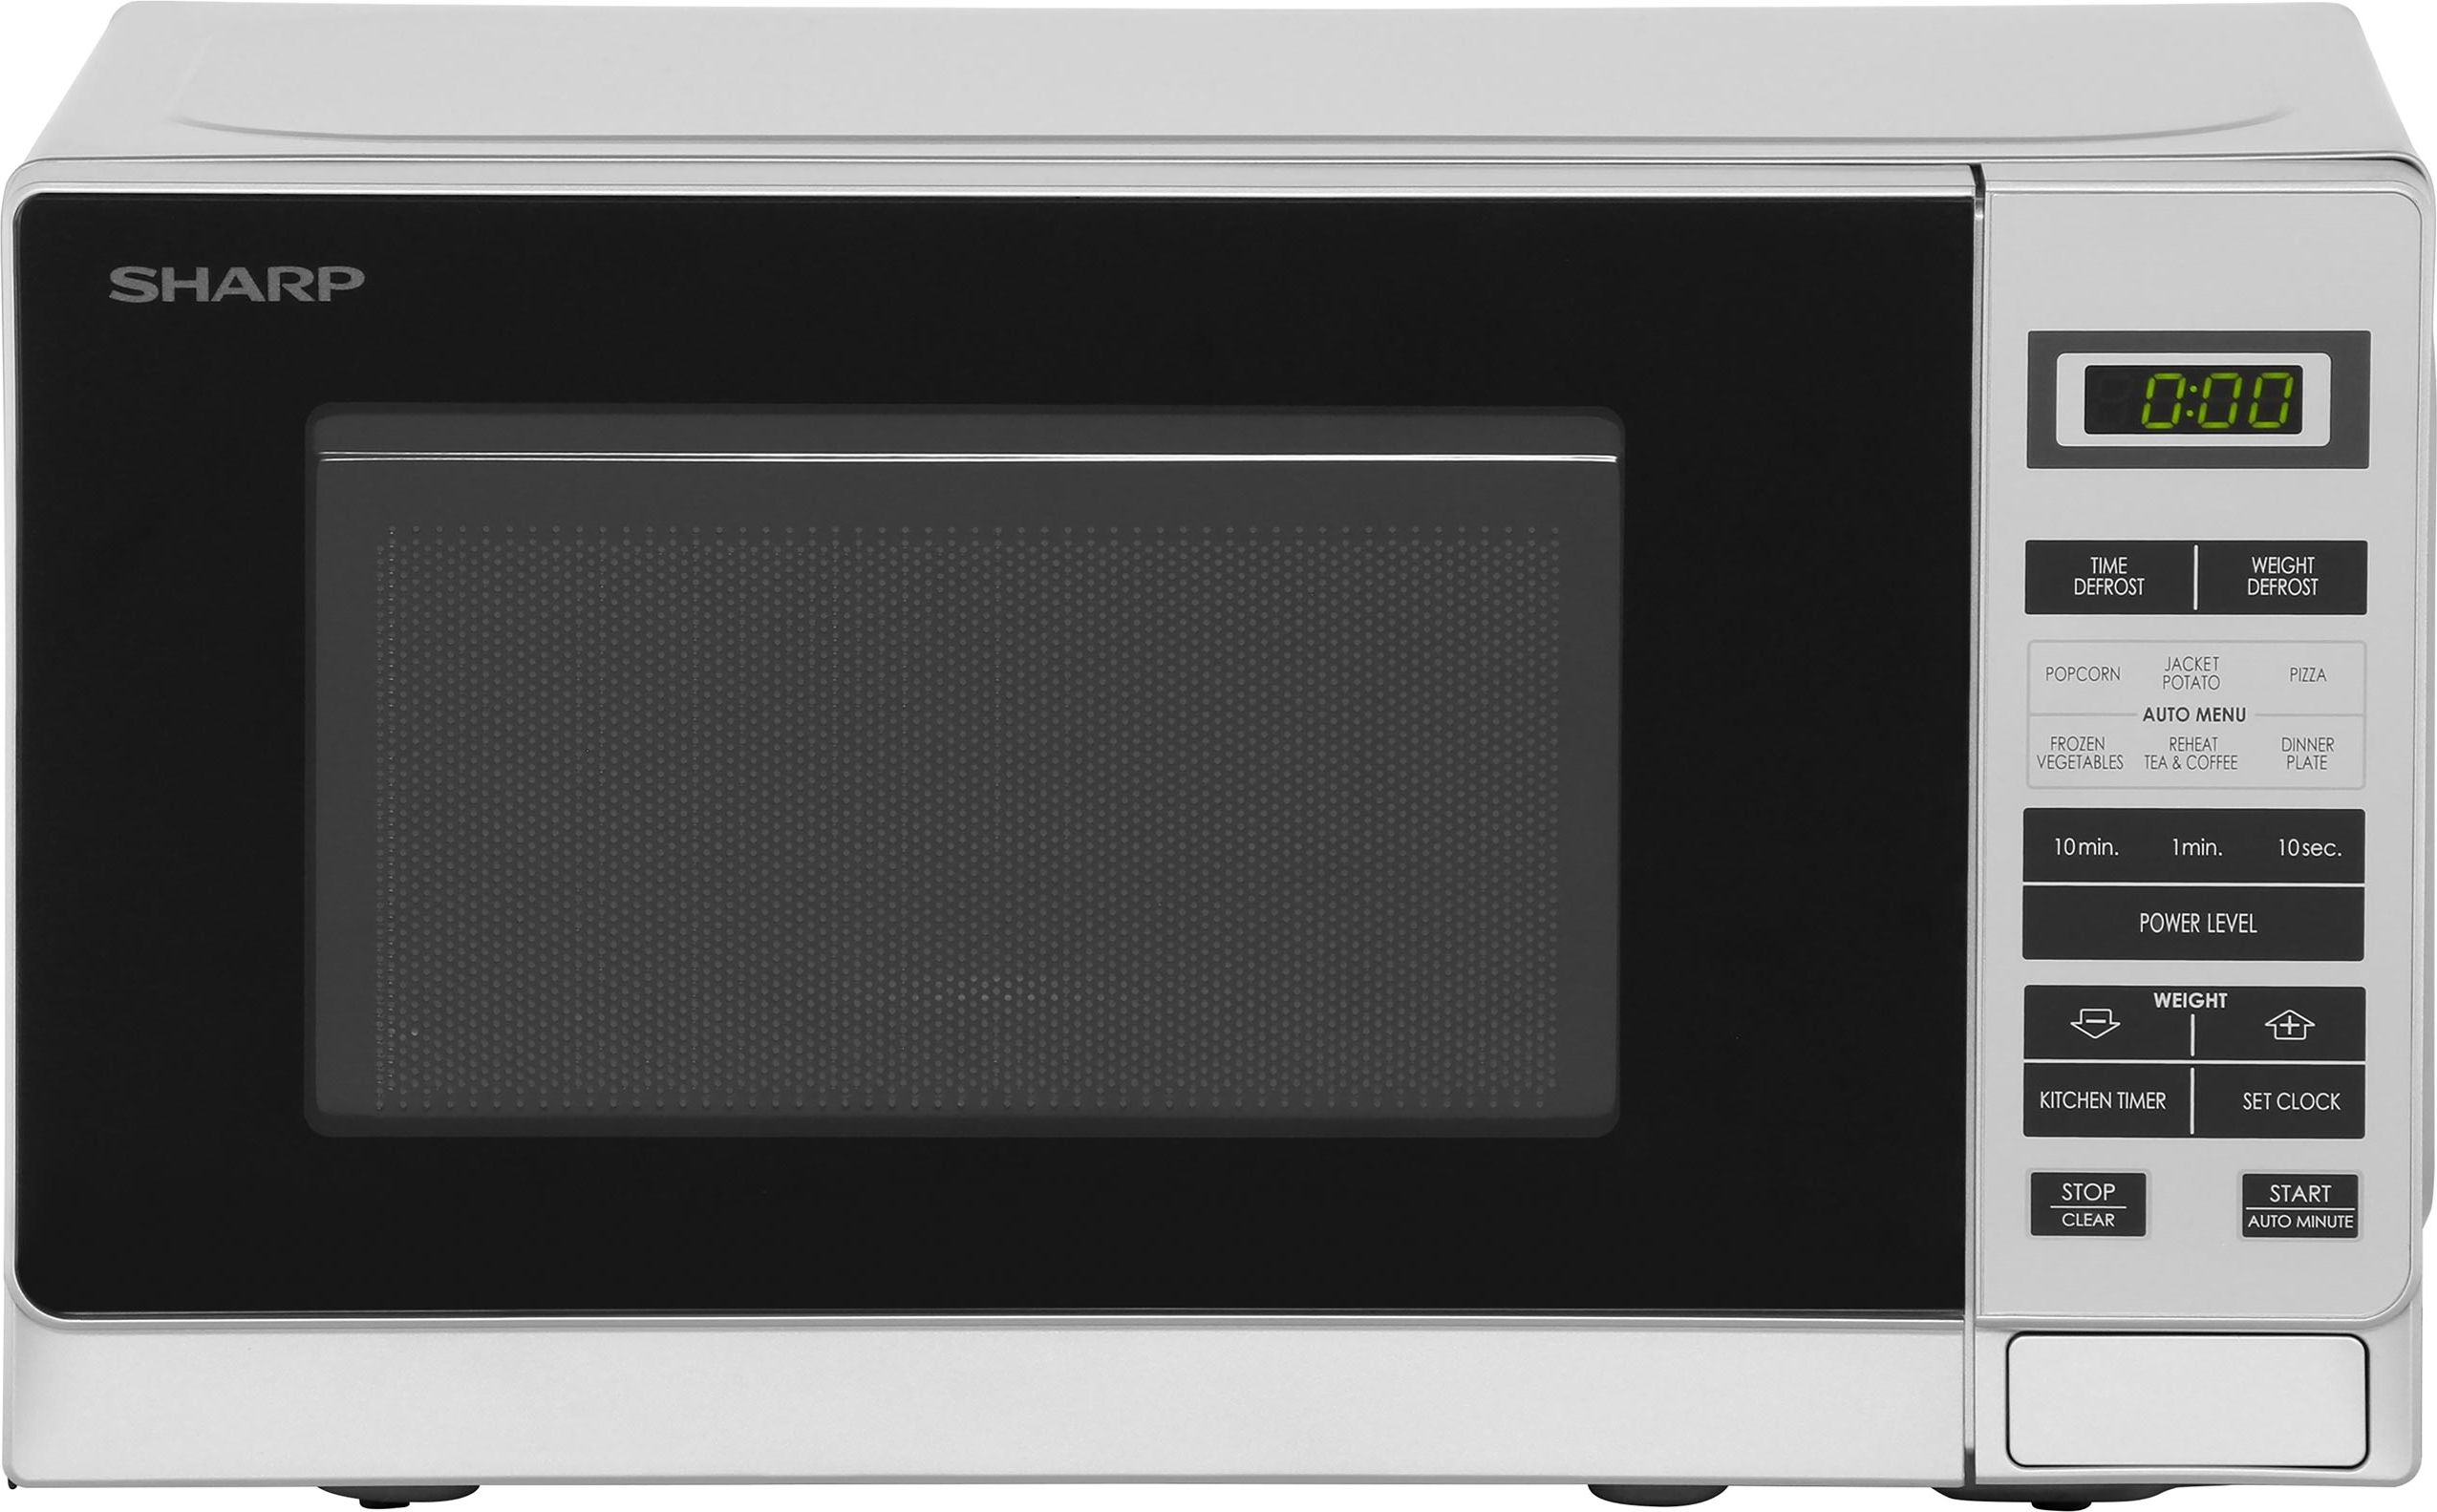 Sharp R220SLM Freestanding 26cm Tall Compact Microwave - Silver, Silver